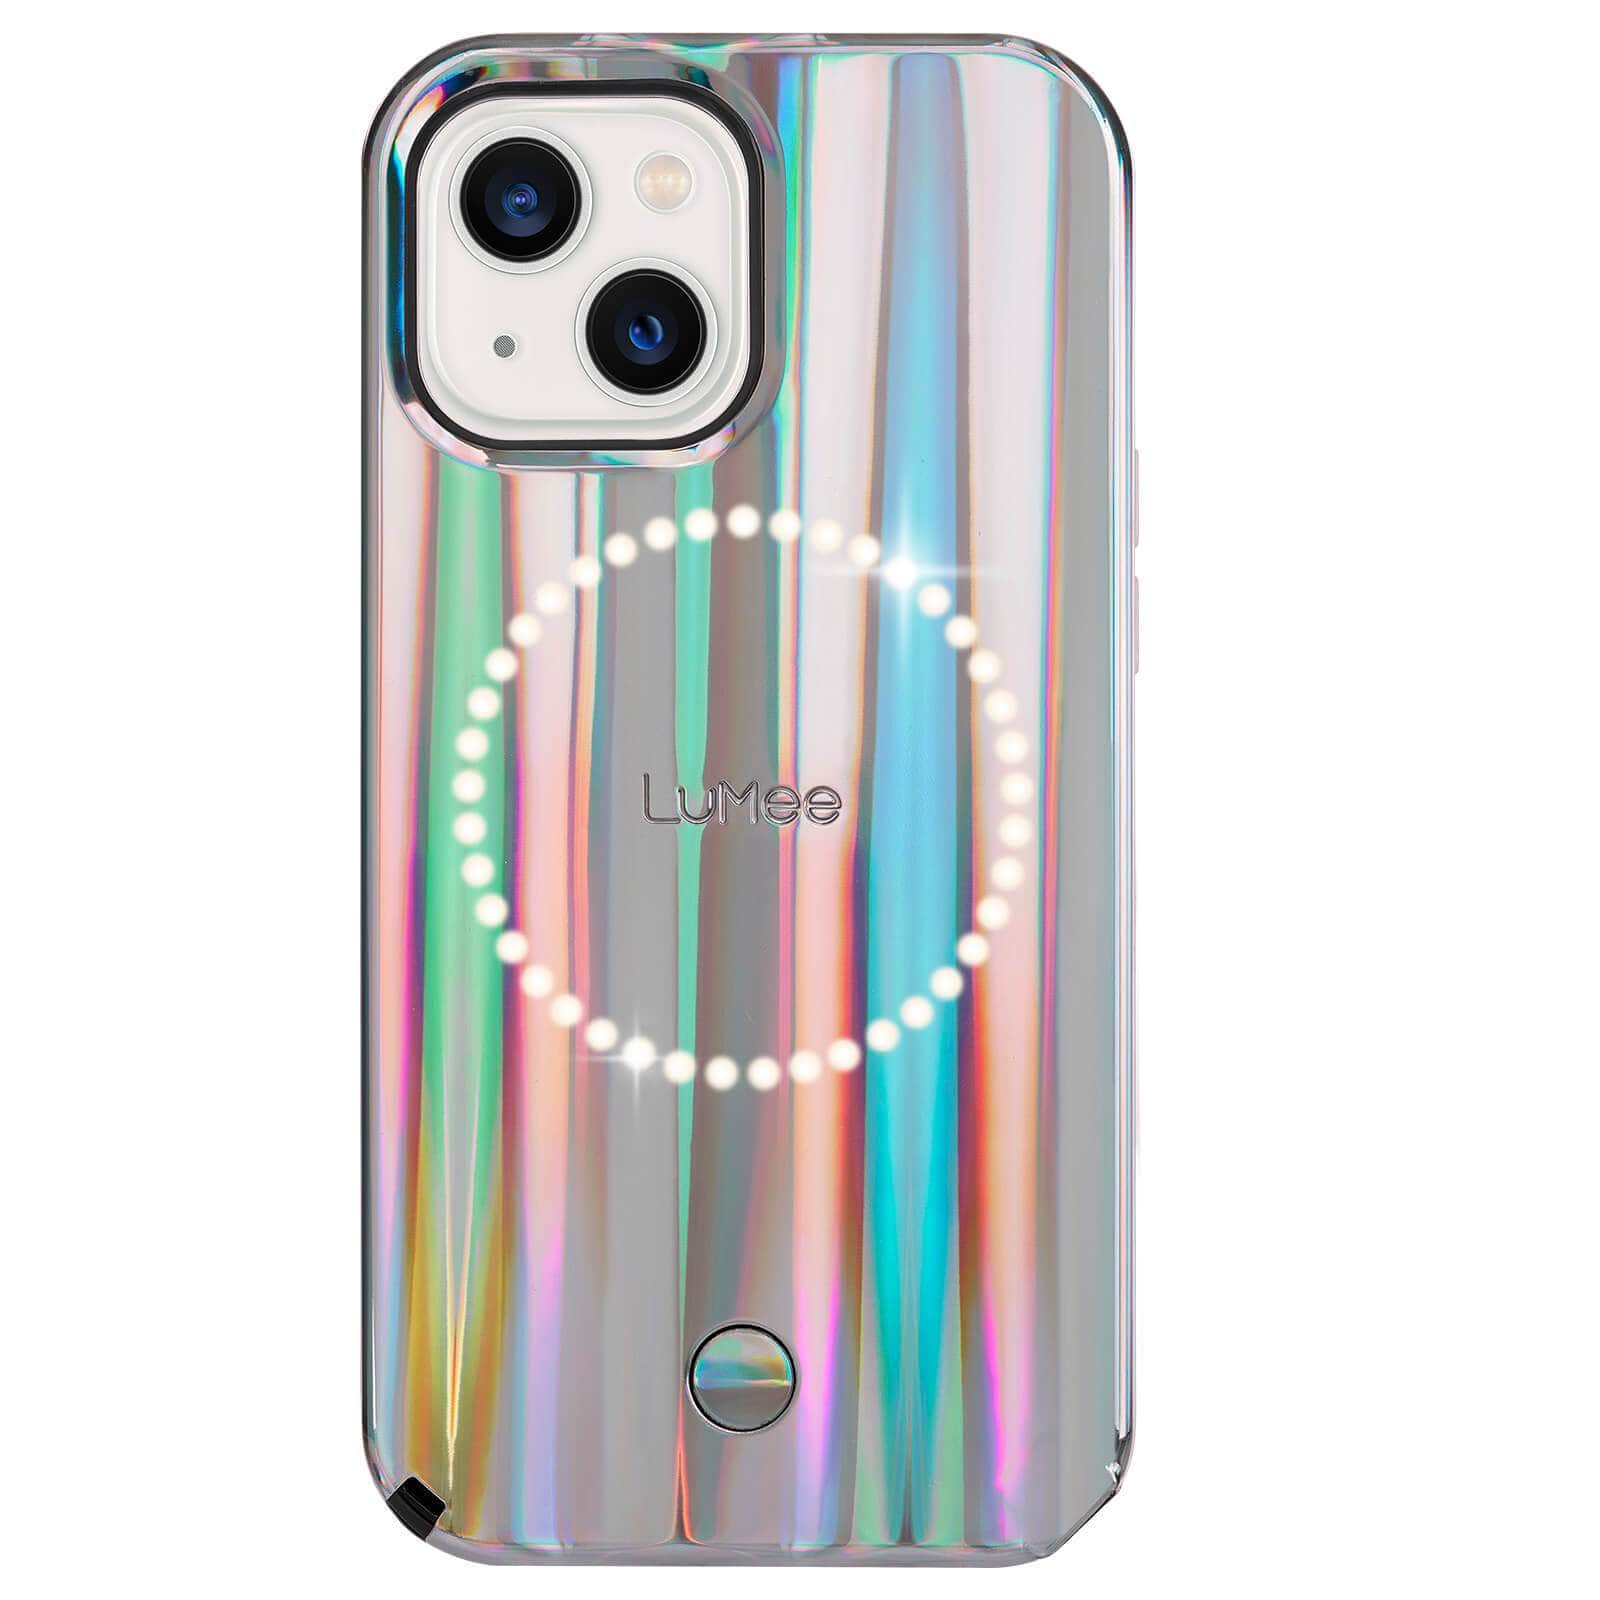 LuMee Lighted Phone Cases - Case-Mate